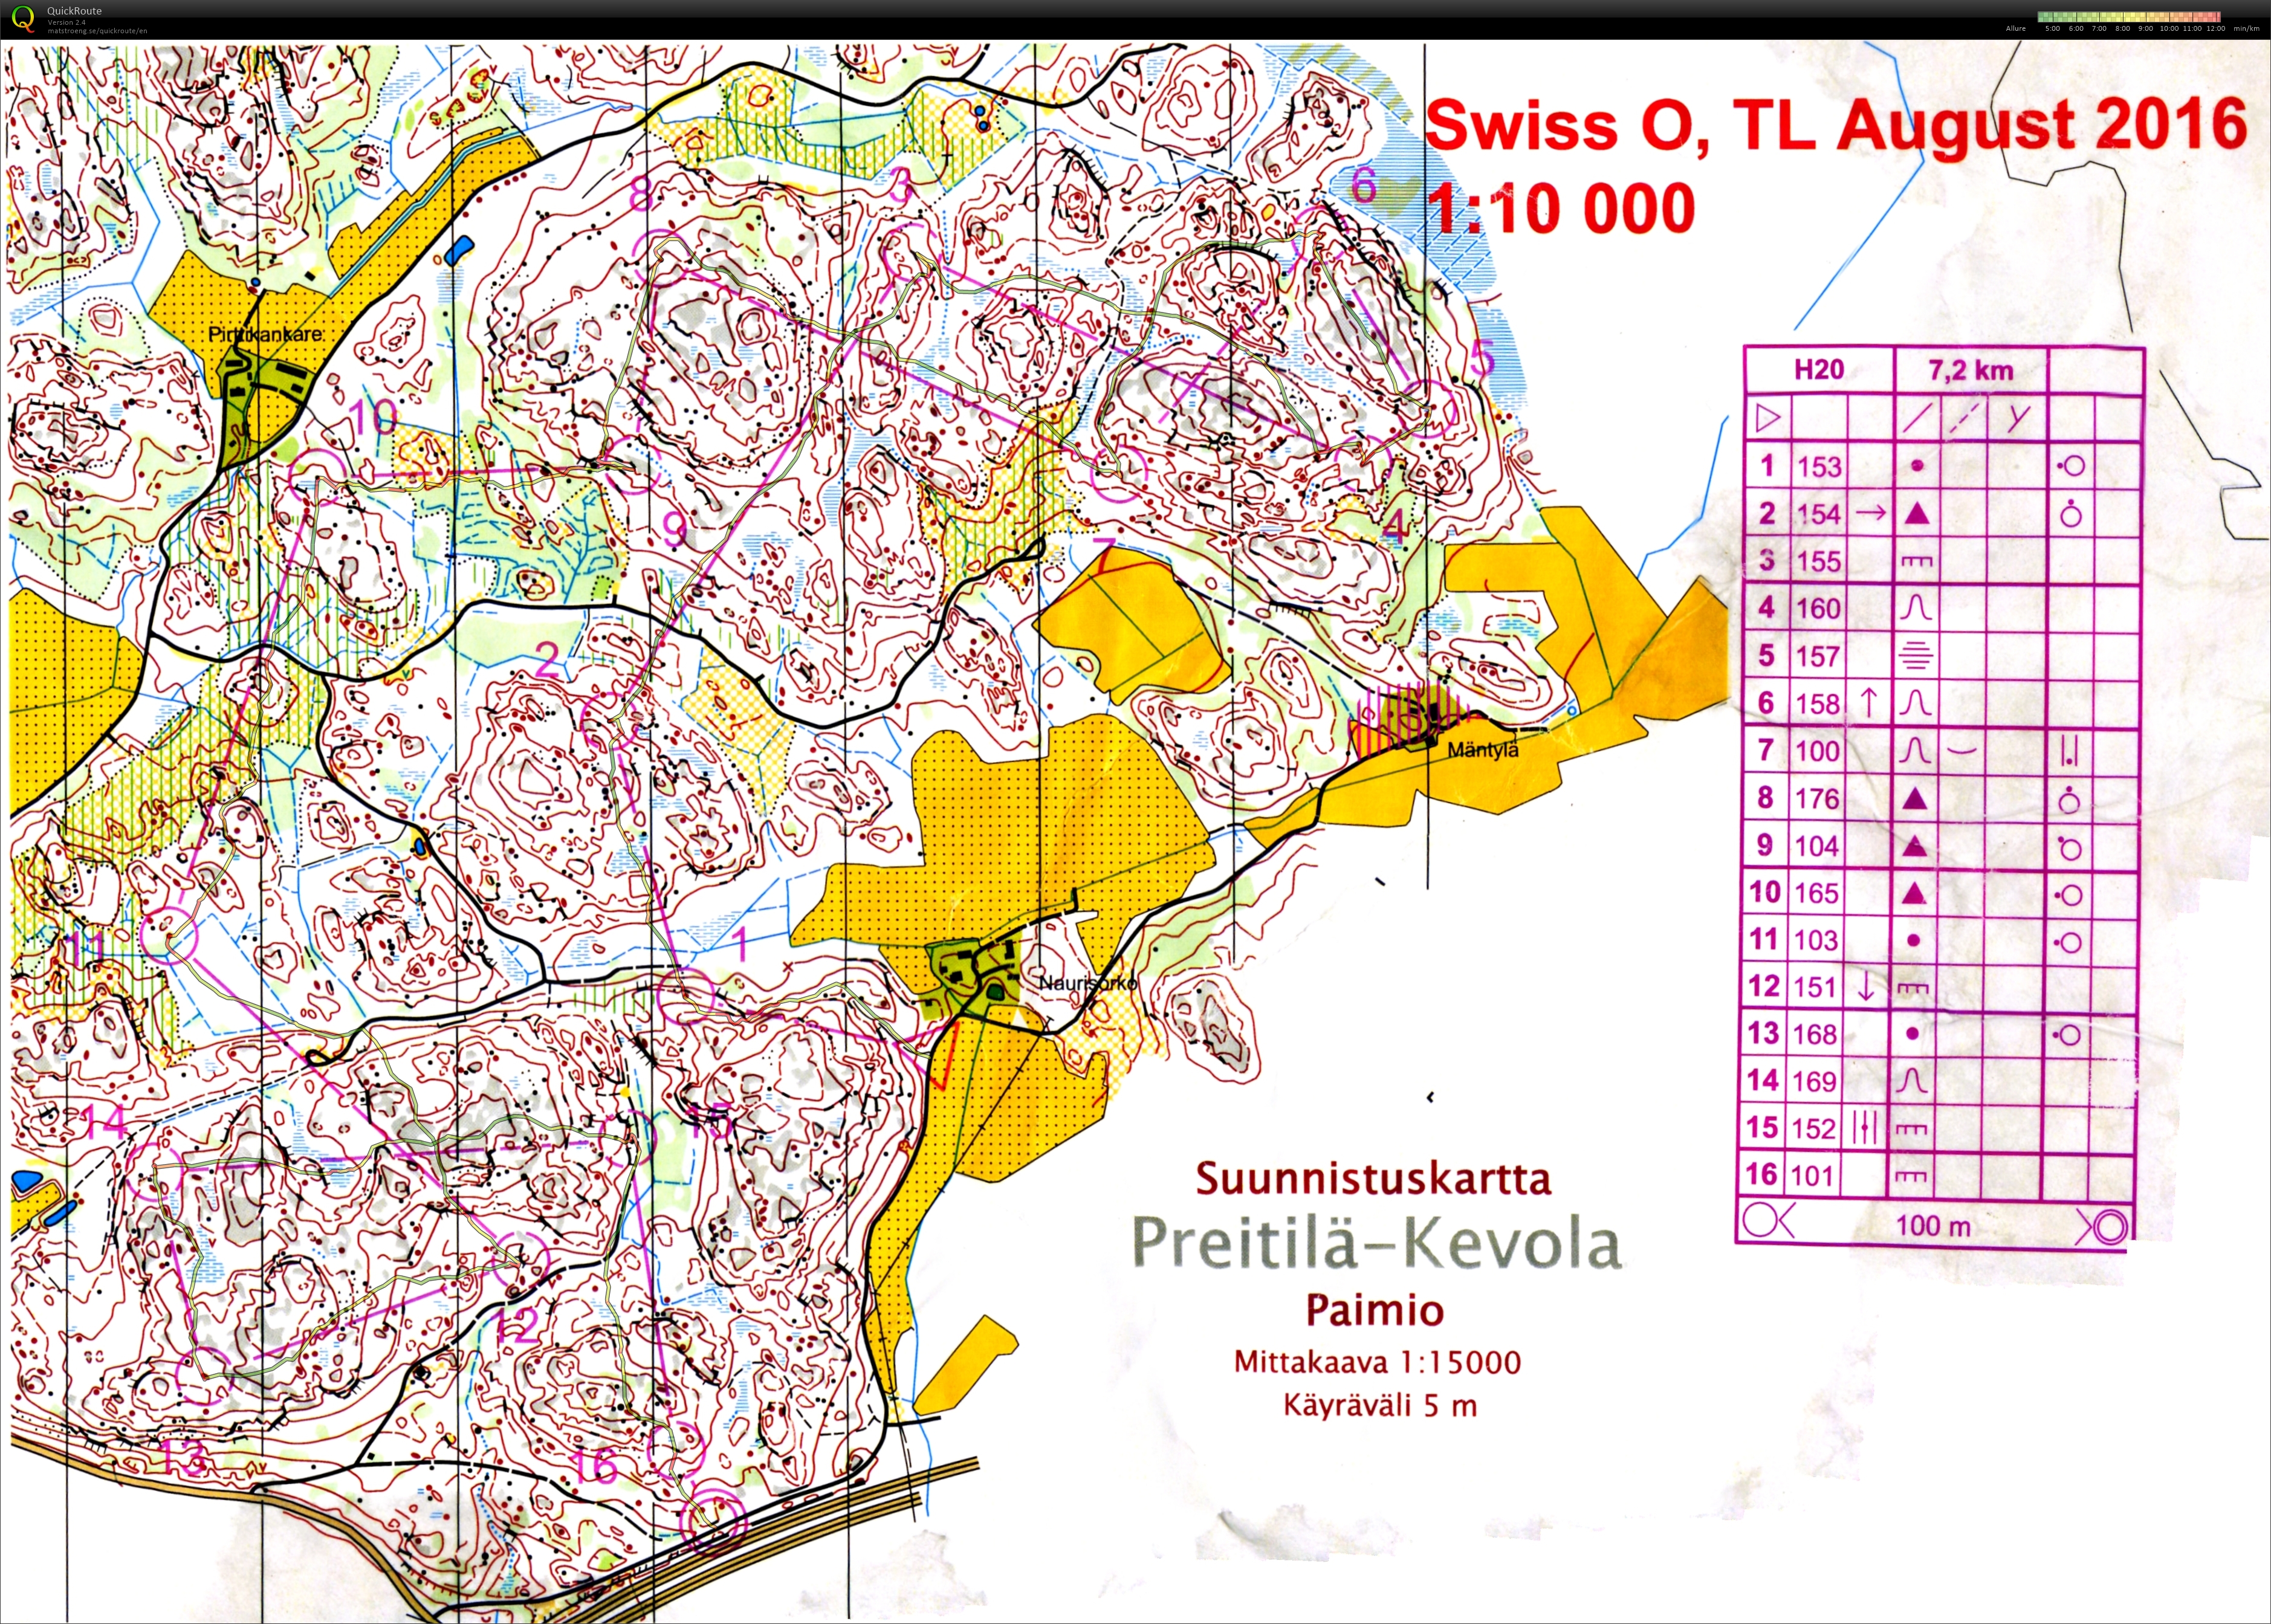 TL JWOC 2017 T7 Attackpoint (04-08-2016)